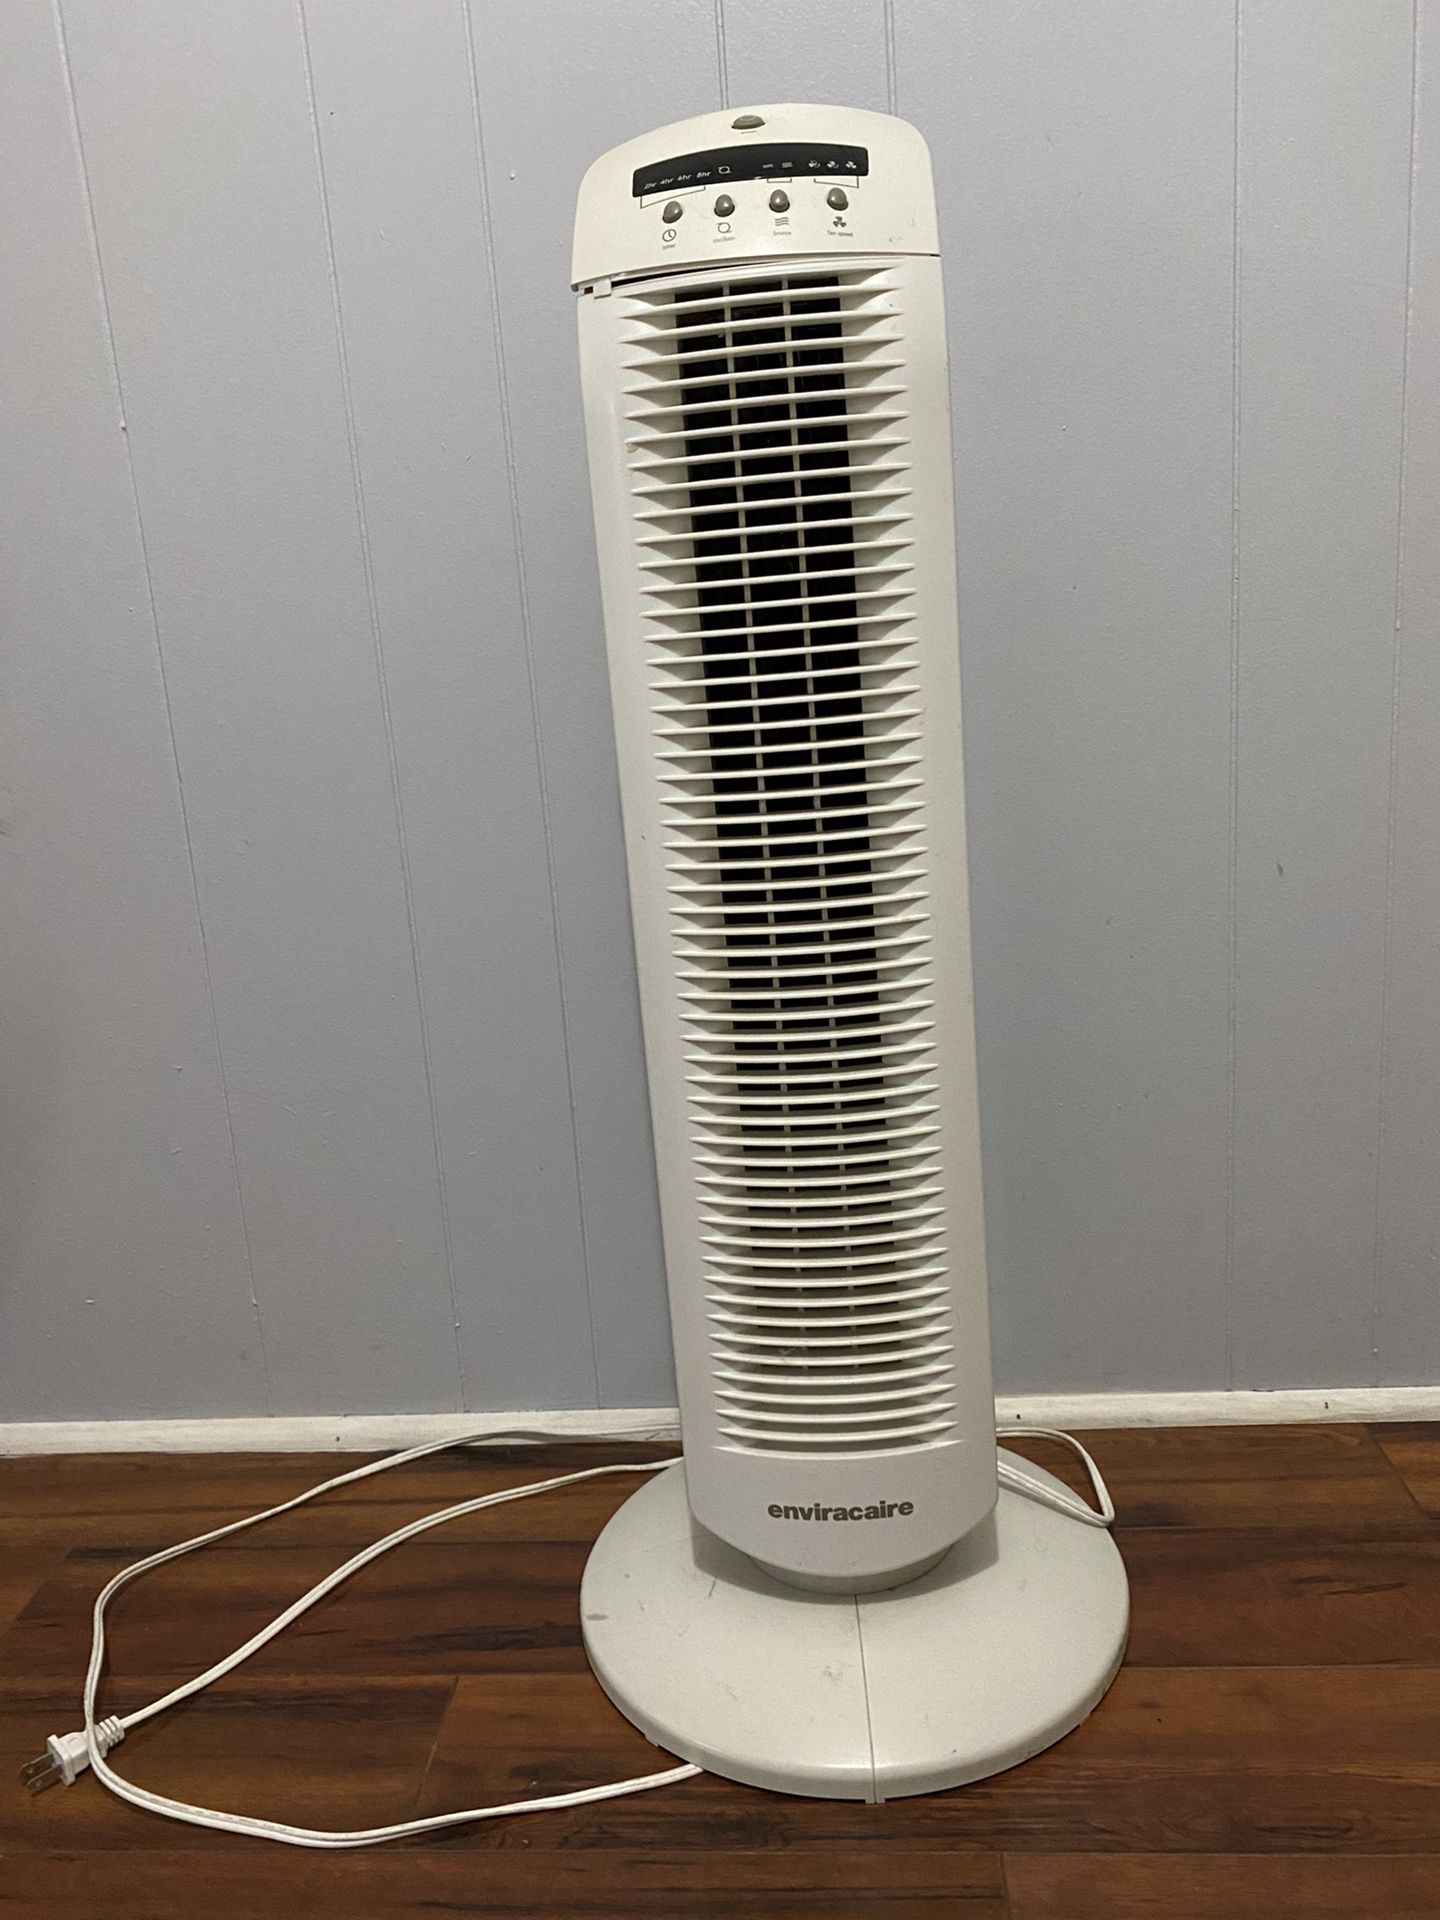 Envirocare stand up oscillating fan with remote